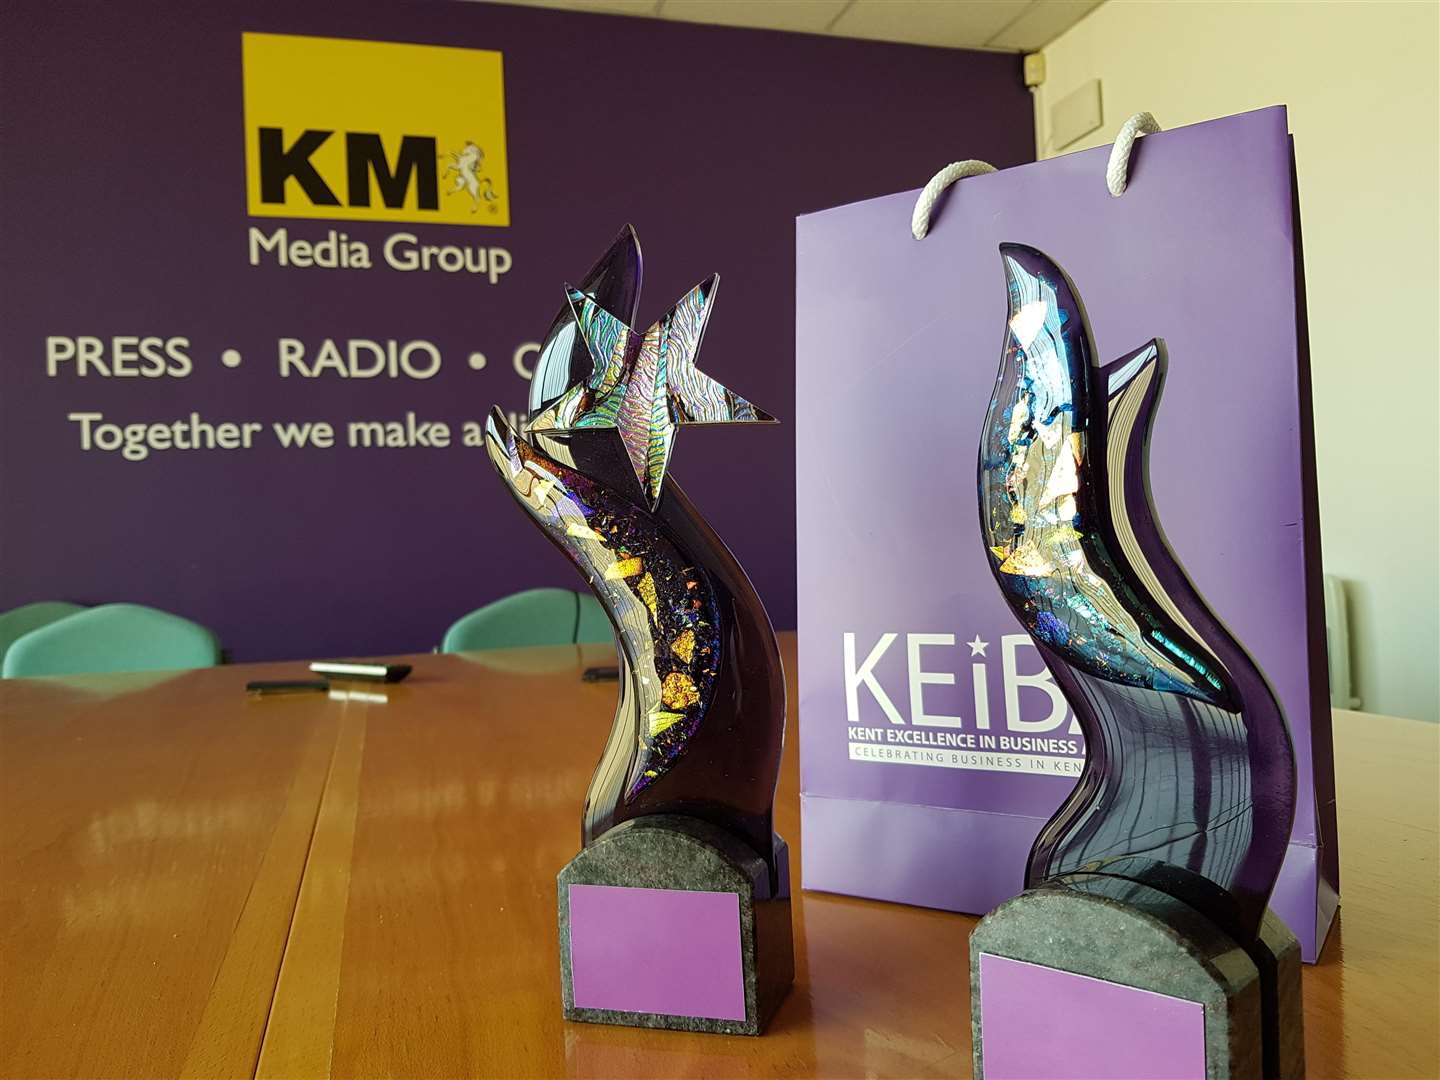 Winners took home the KEiBA 2018 trophy - the one with the star was awarded for outstanding contribution